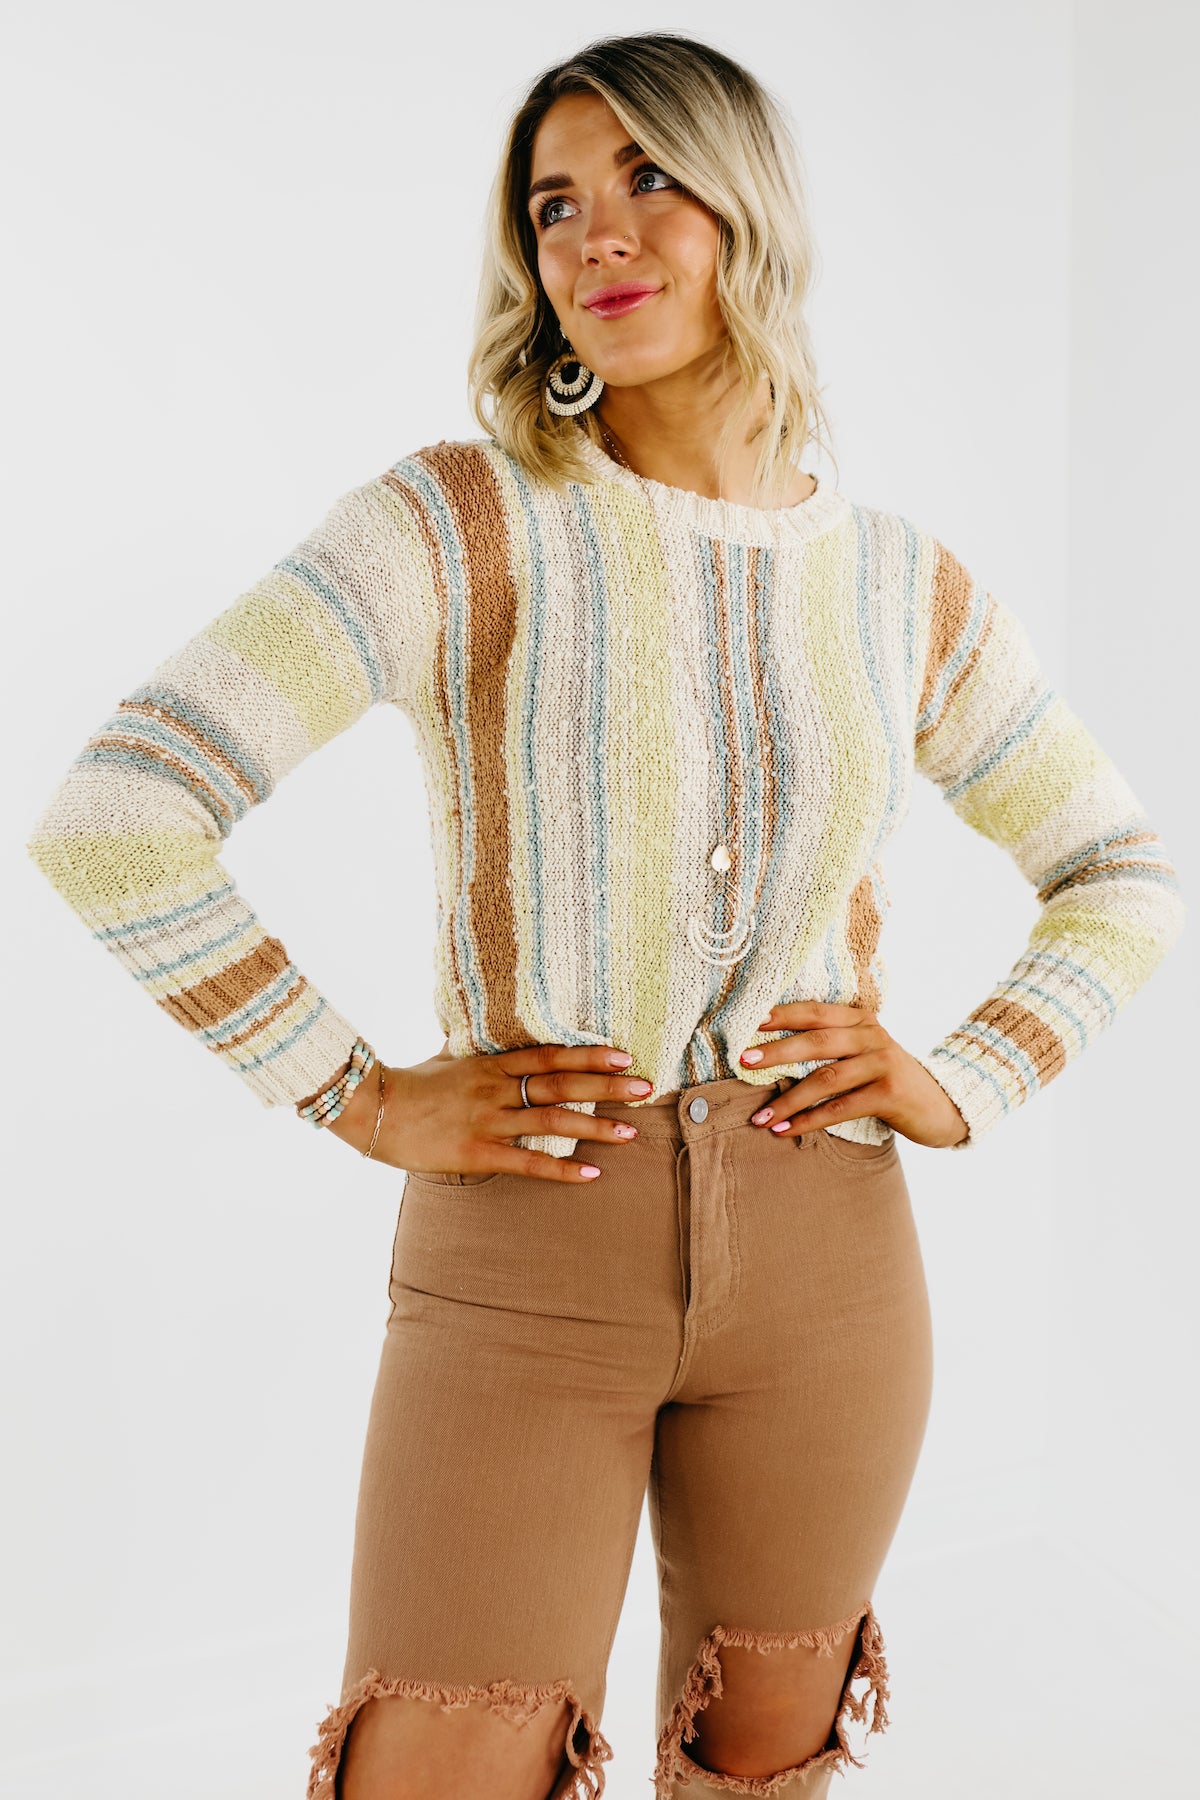 The Gabriel Textured Striped Spring Sweater - FINAL SALE